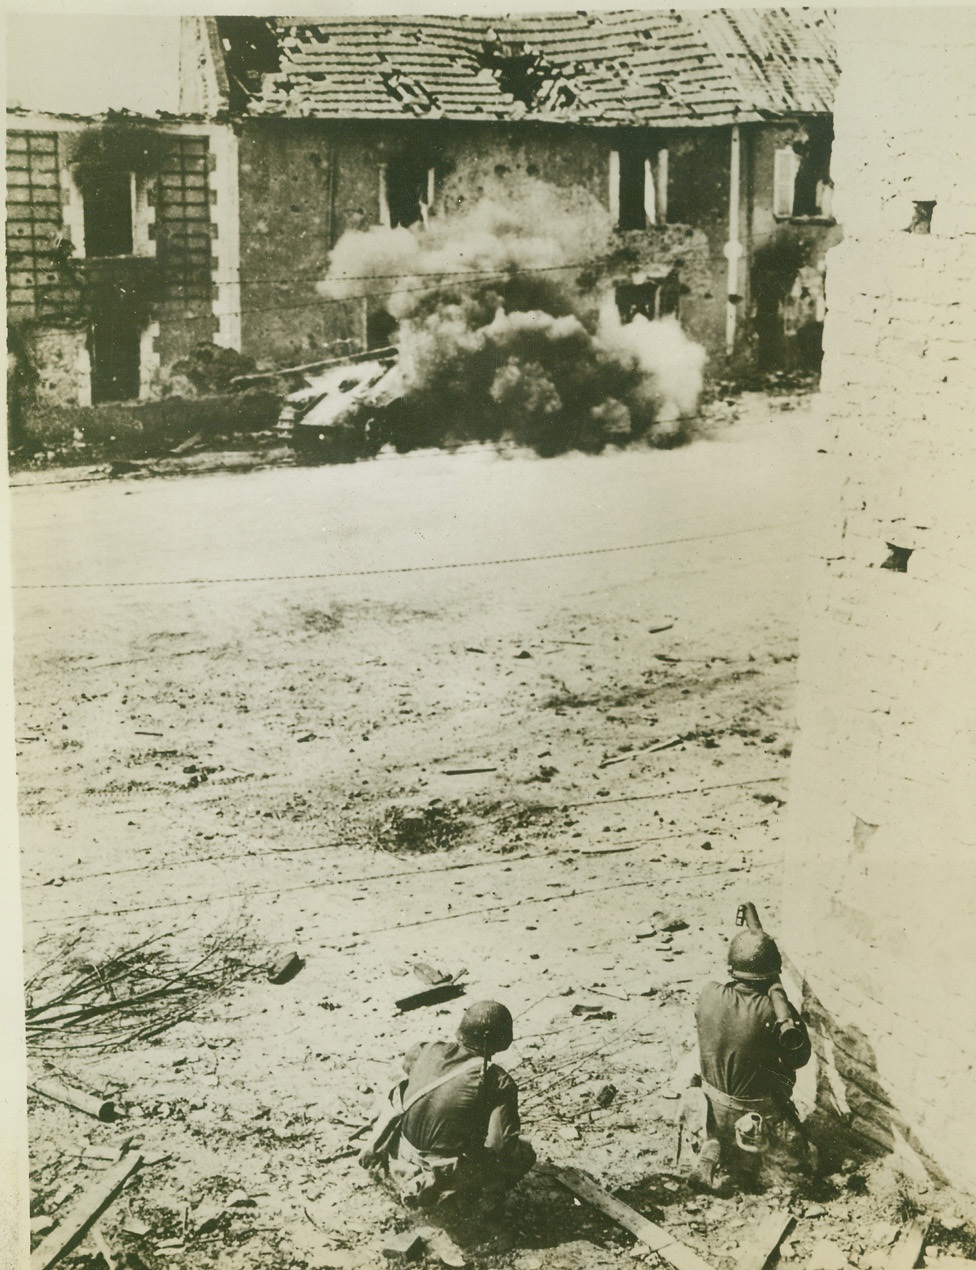 Removing German Tank Obstacle, 8/1/1944. Normandy, France—The camera records the instant when the bazooka guns fired by the Allied soldiers in the foreground score direct hits on the German tank in the rear, and the vehicle goes up in a cloud of flame and smoke. The soldiers were aiming at the wrecked building which housed German snipers, but the tank was blocking their attack. Credit: ACME;